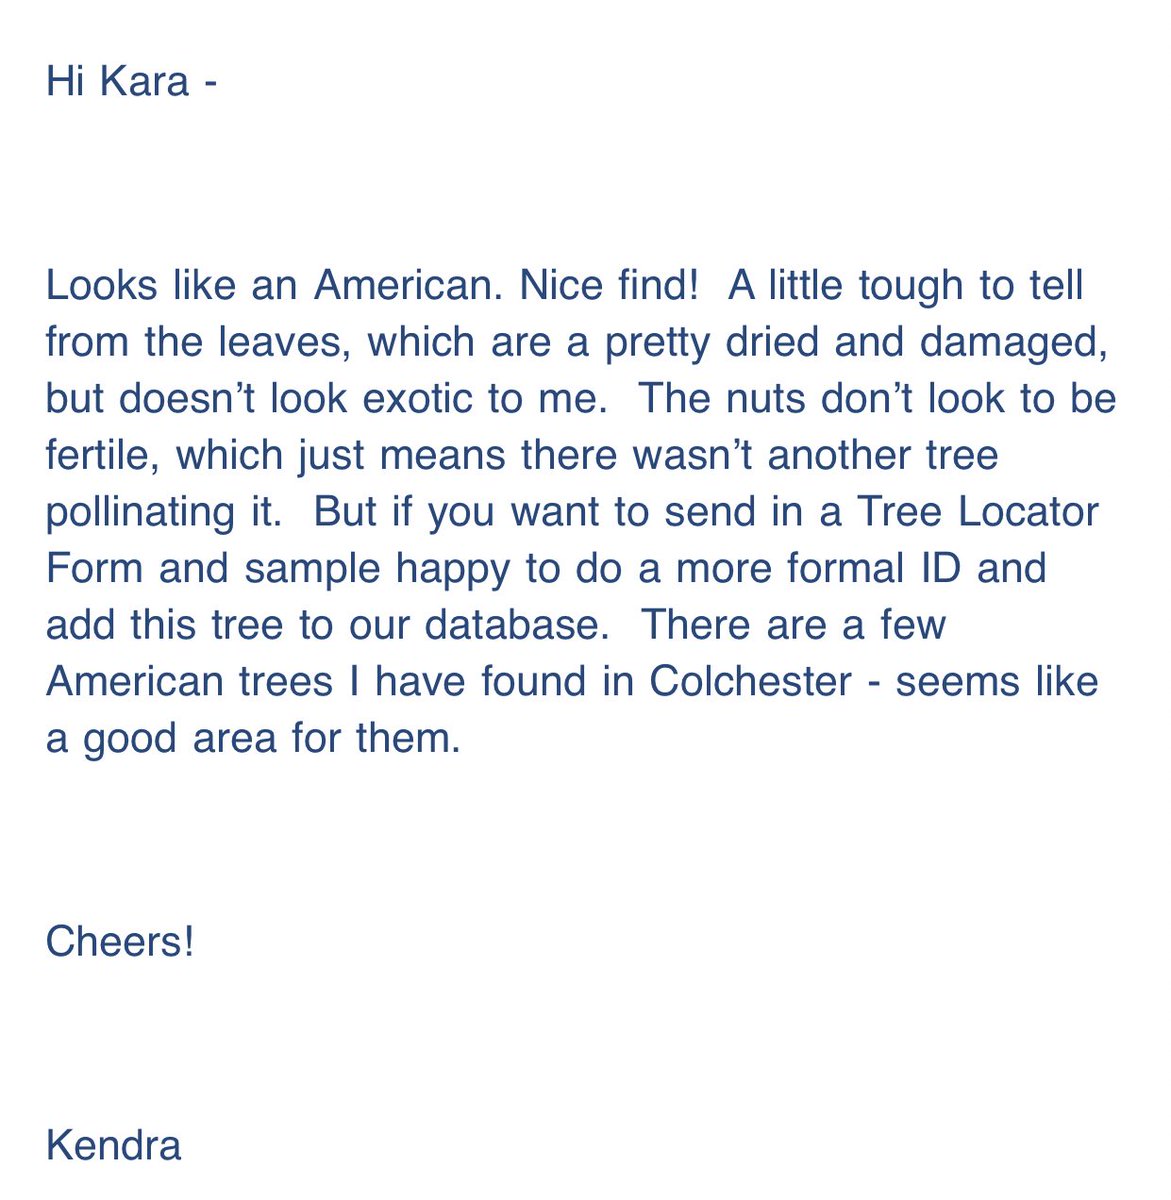 FREAKING CONFIRMED!!! ITS ONE OF THE GREAT ANERICAN TREASURES OF THE NORTHEAST!!!! Email reply from our local American Chestnut Association rep: